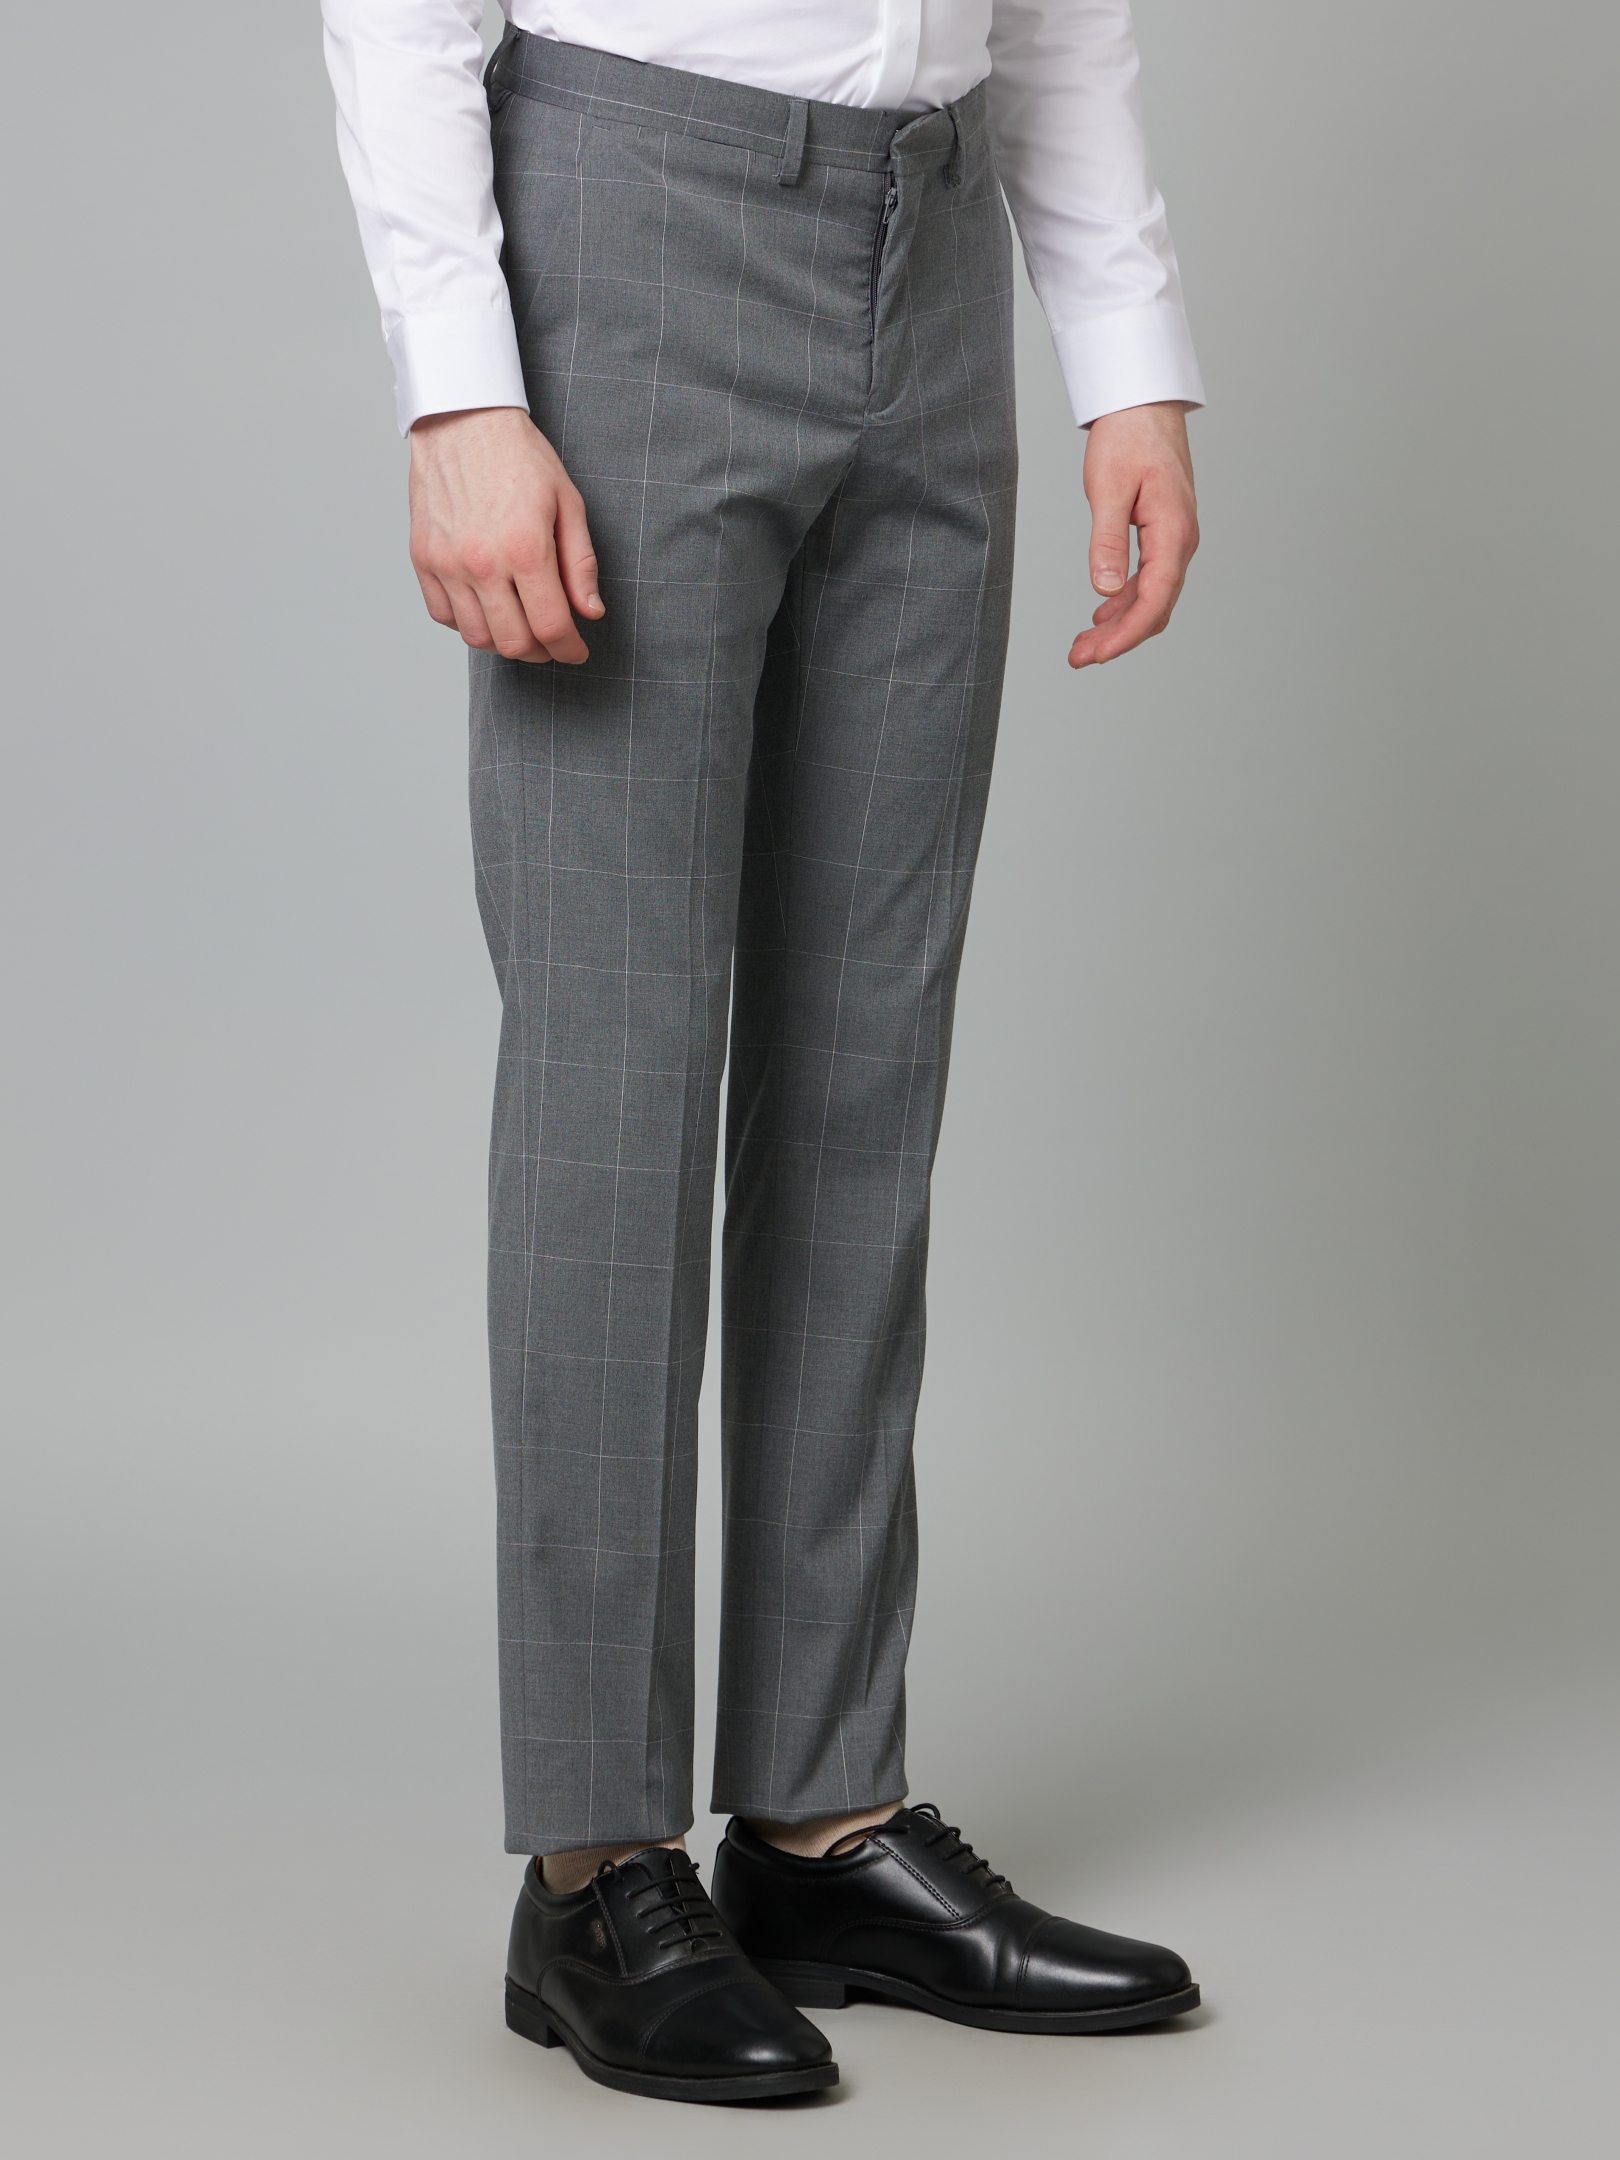 Mens Windowpane Check Tailored Fit Grey Suit Trousers Formal Wedding  Business Smart Pants - Etsy